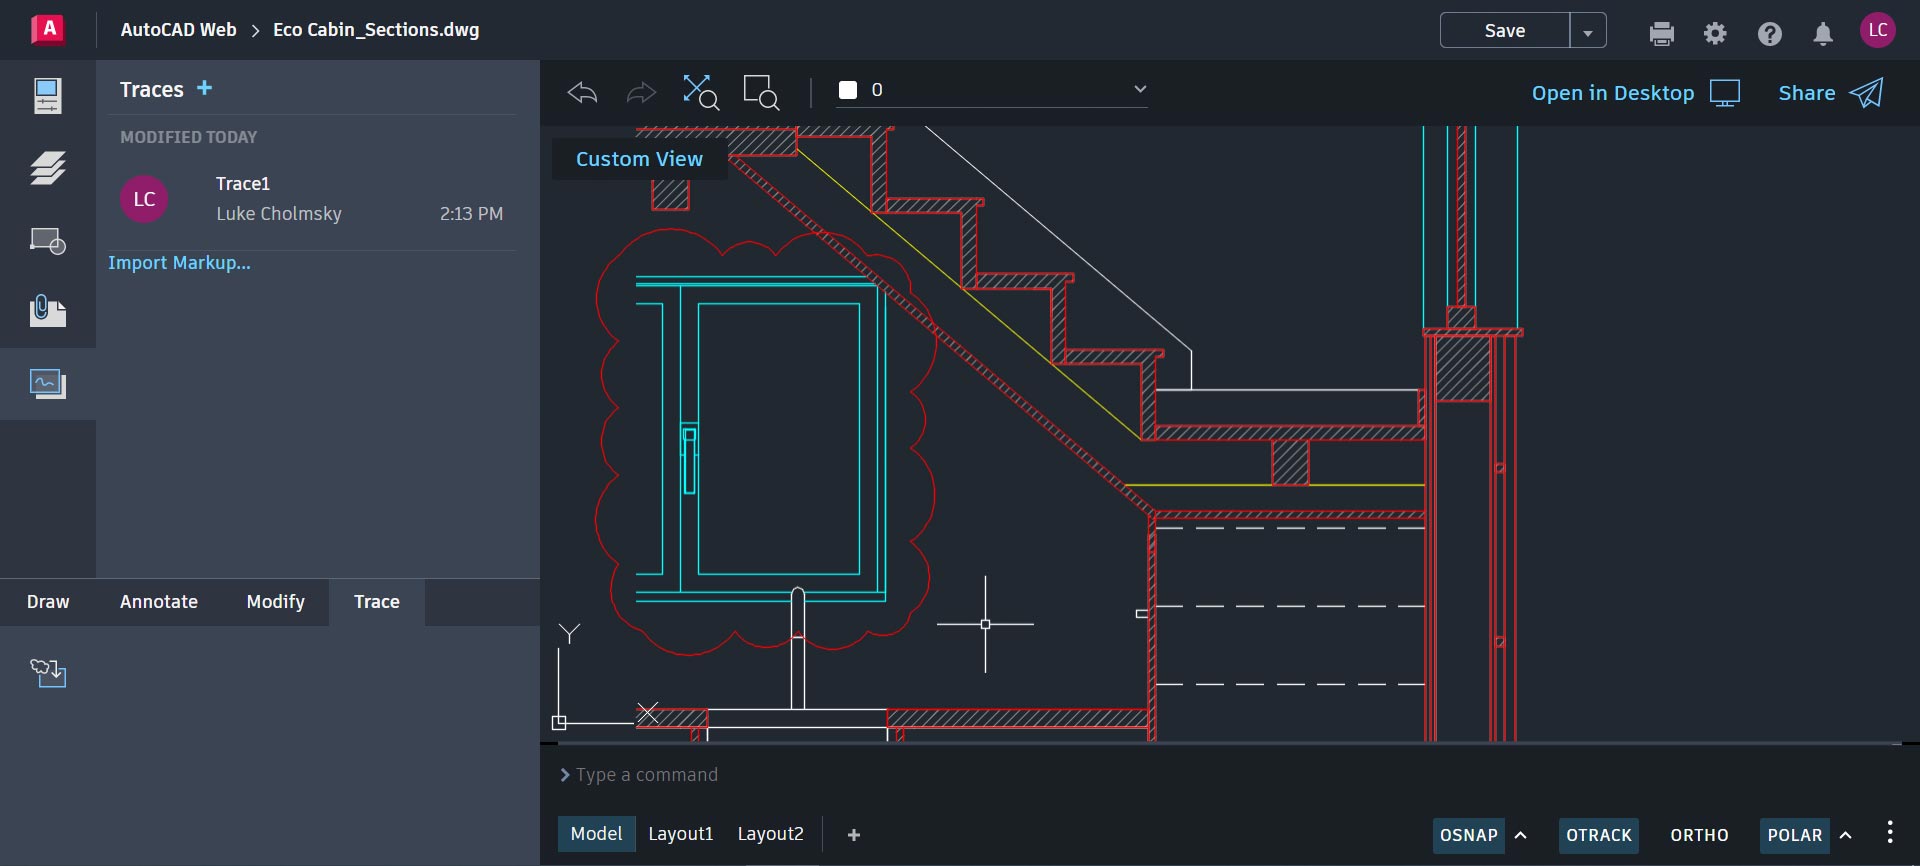 Trace function in AutoCAD Web